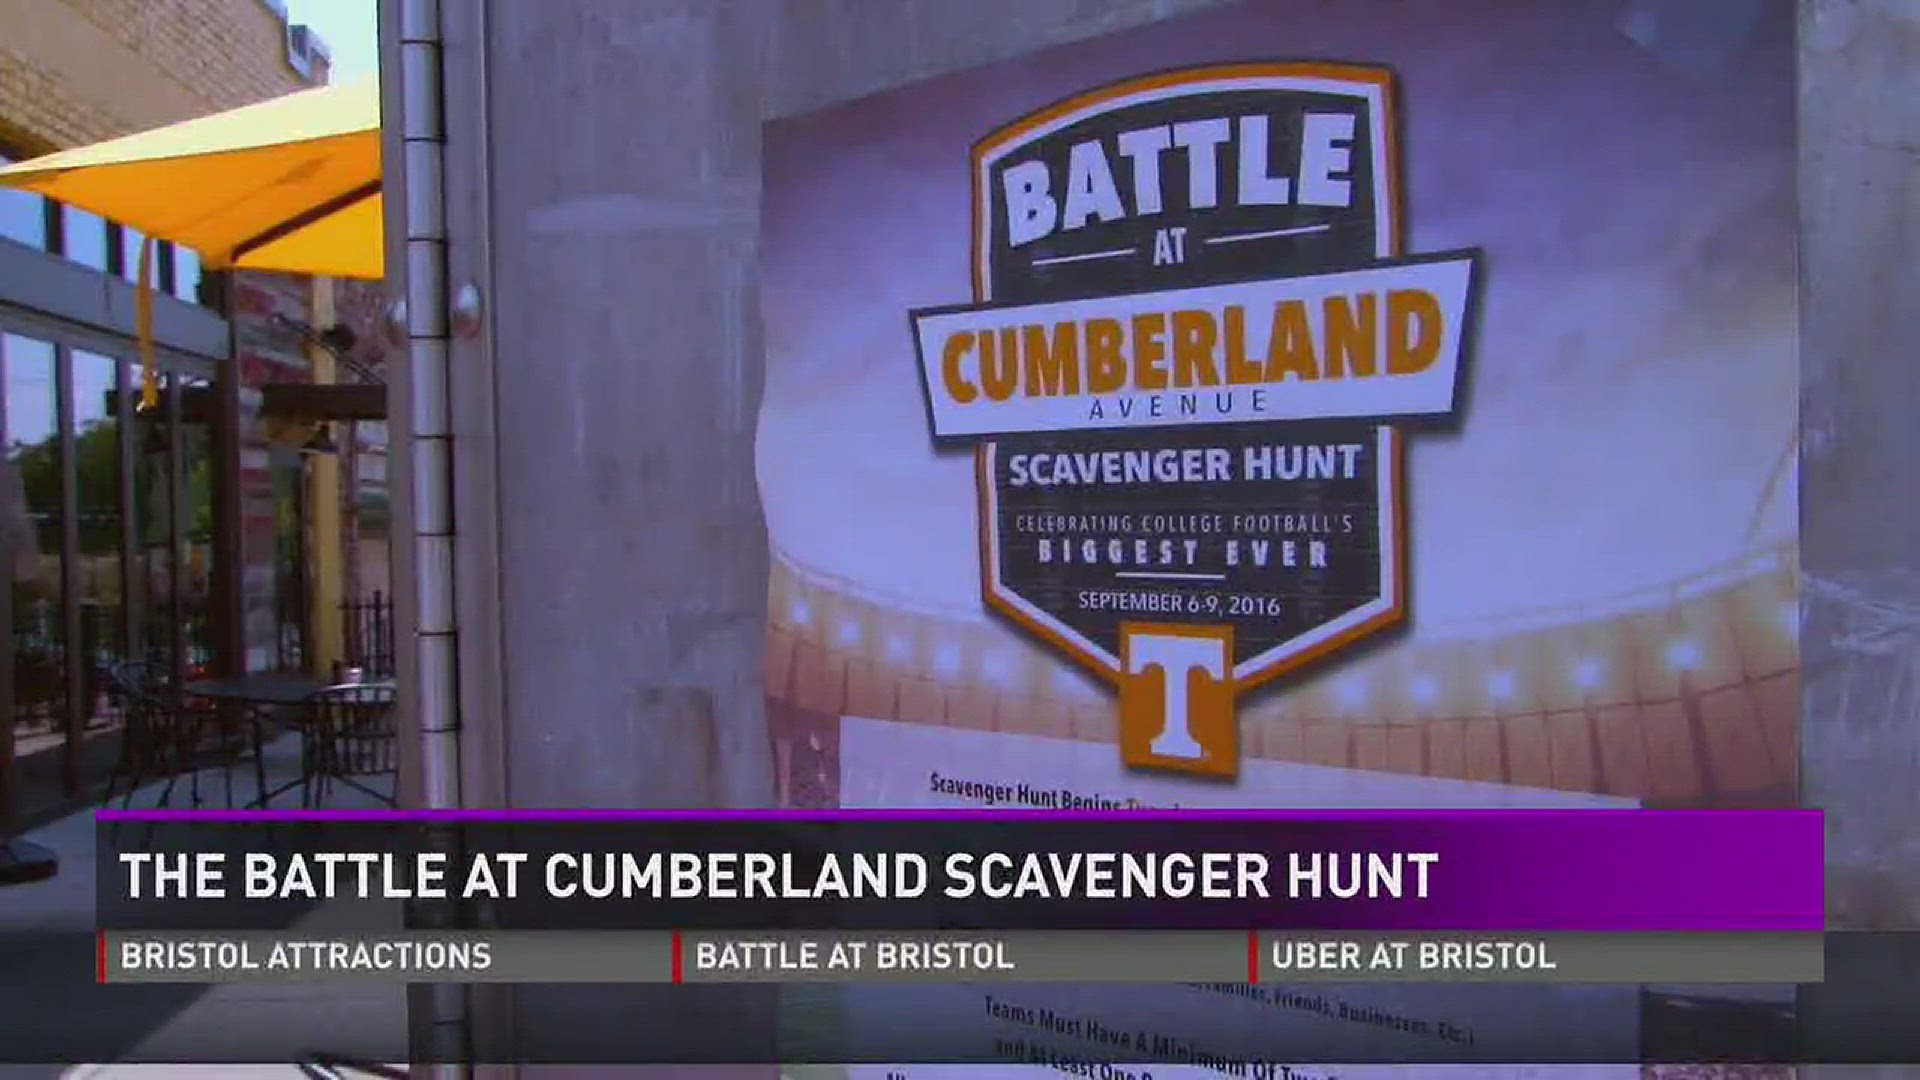 The Battle at Cumberland scavenger hunt started Tuesday morning.